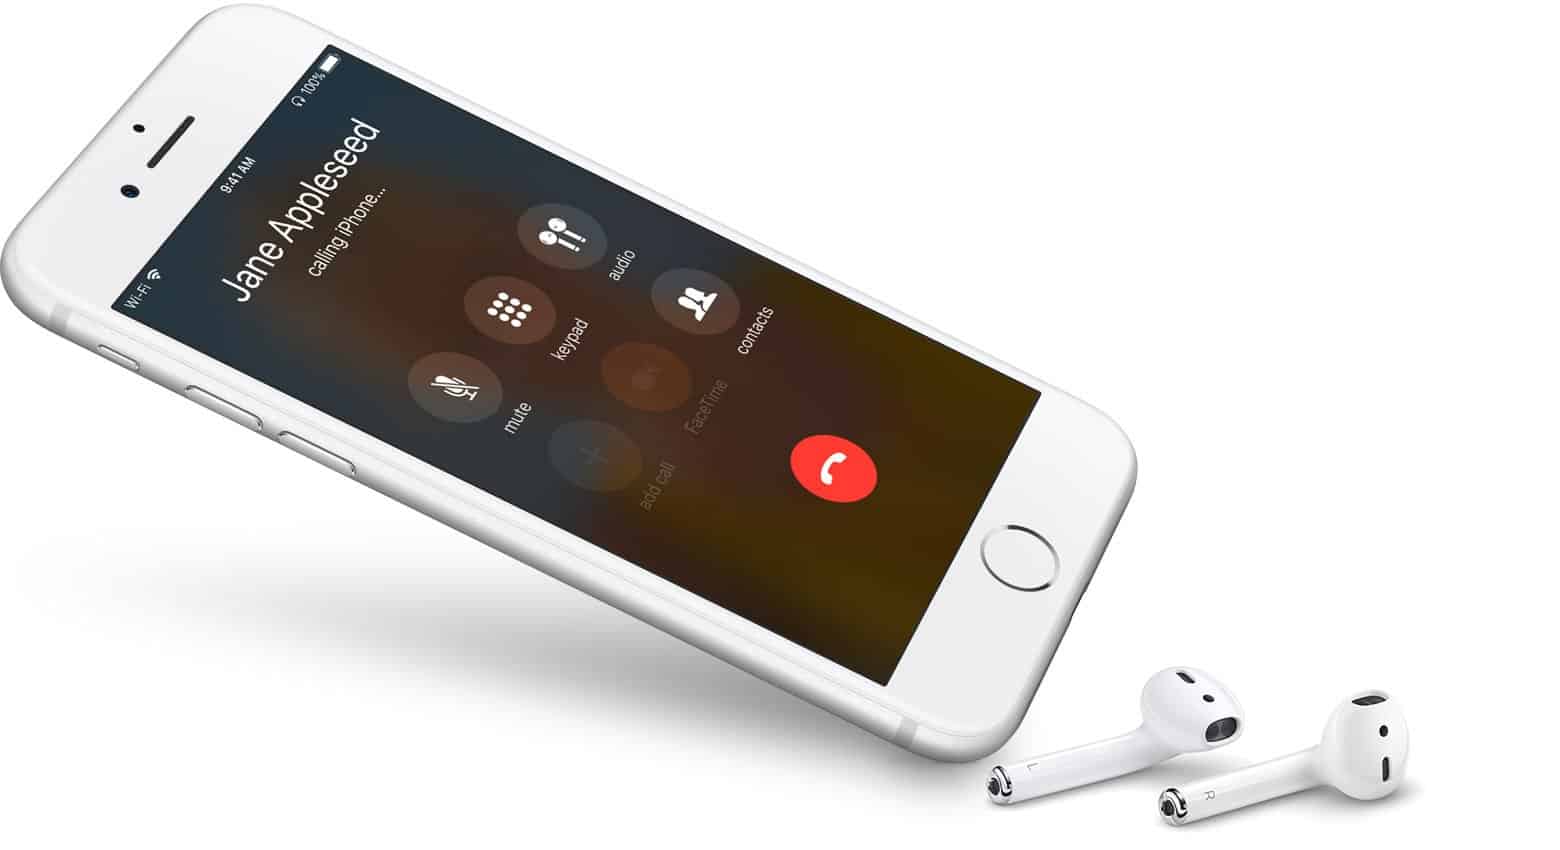 WiFi calling not working on iPhone after iOS 12? Try These Fixes